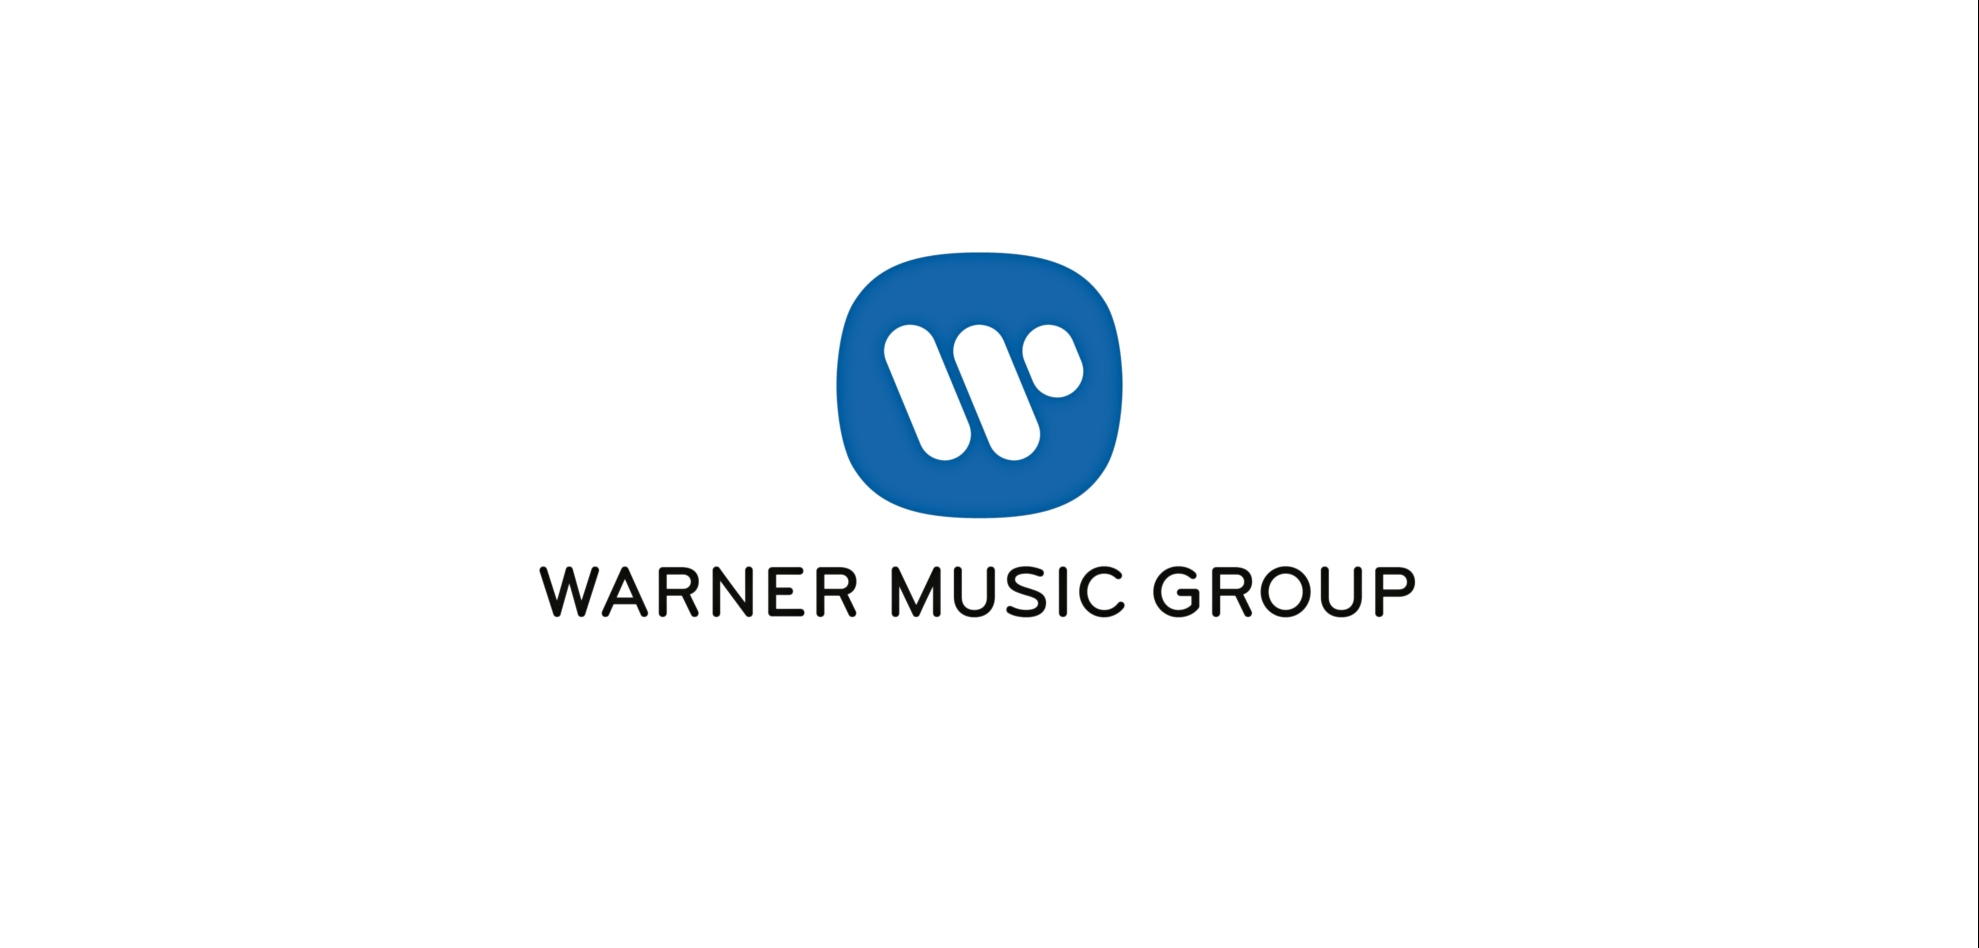 NATASCHA AUGUSTIN NAMED MANAGING DIRECTOR OF WARNER CHAPPELL MUSIC GERMANY